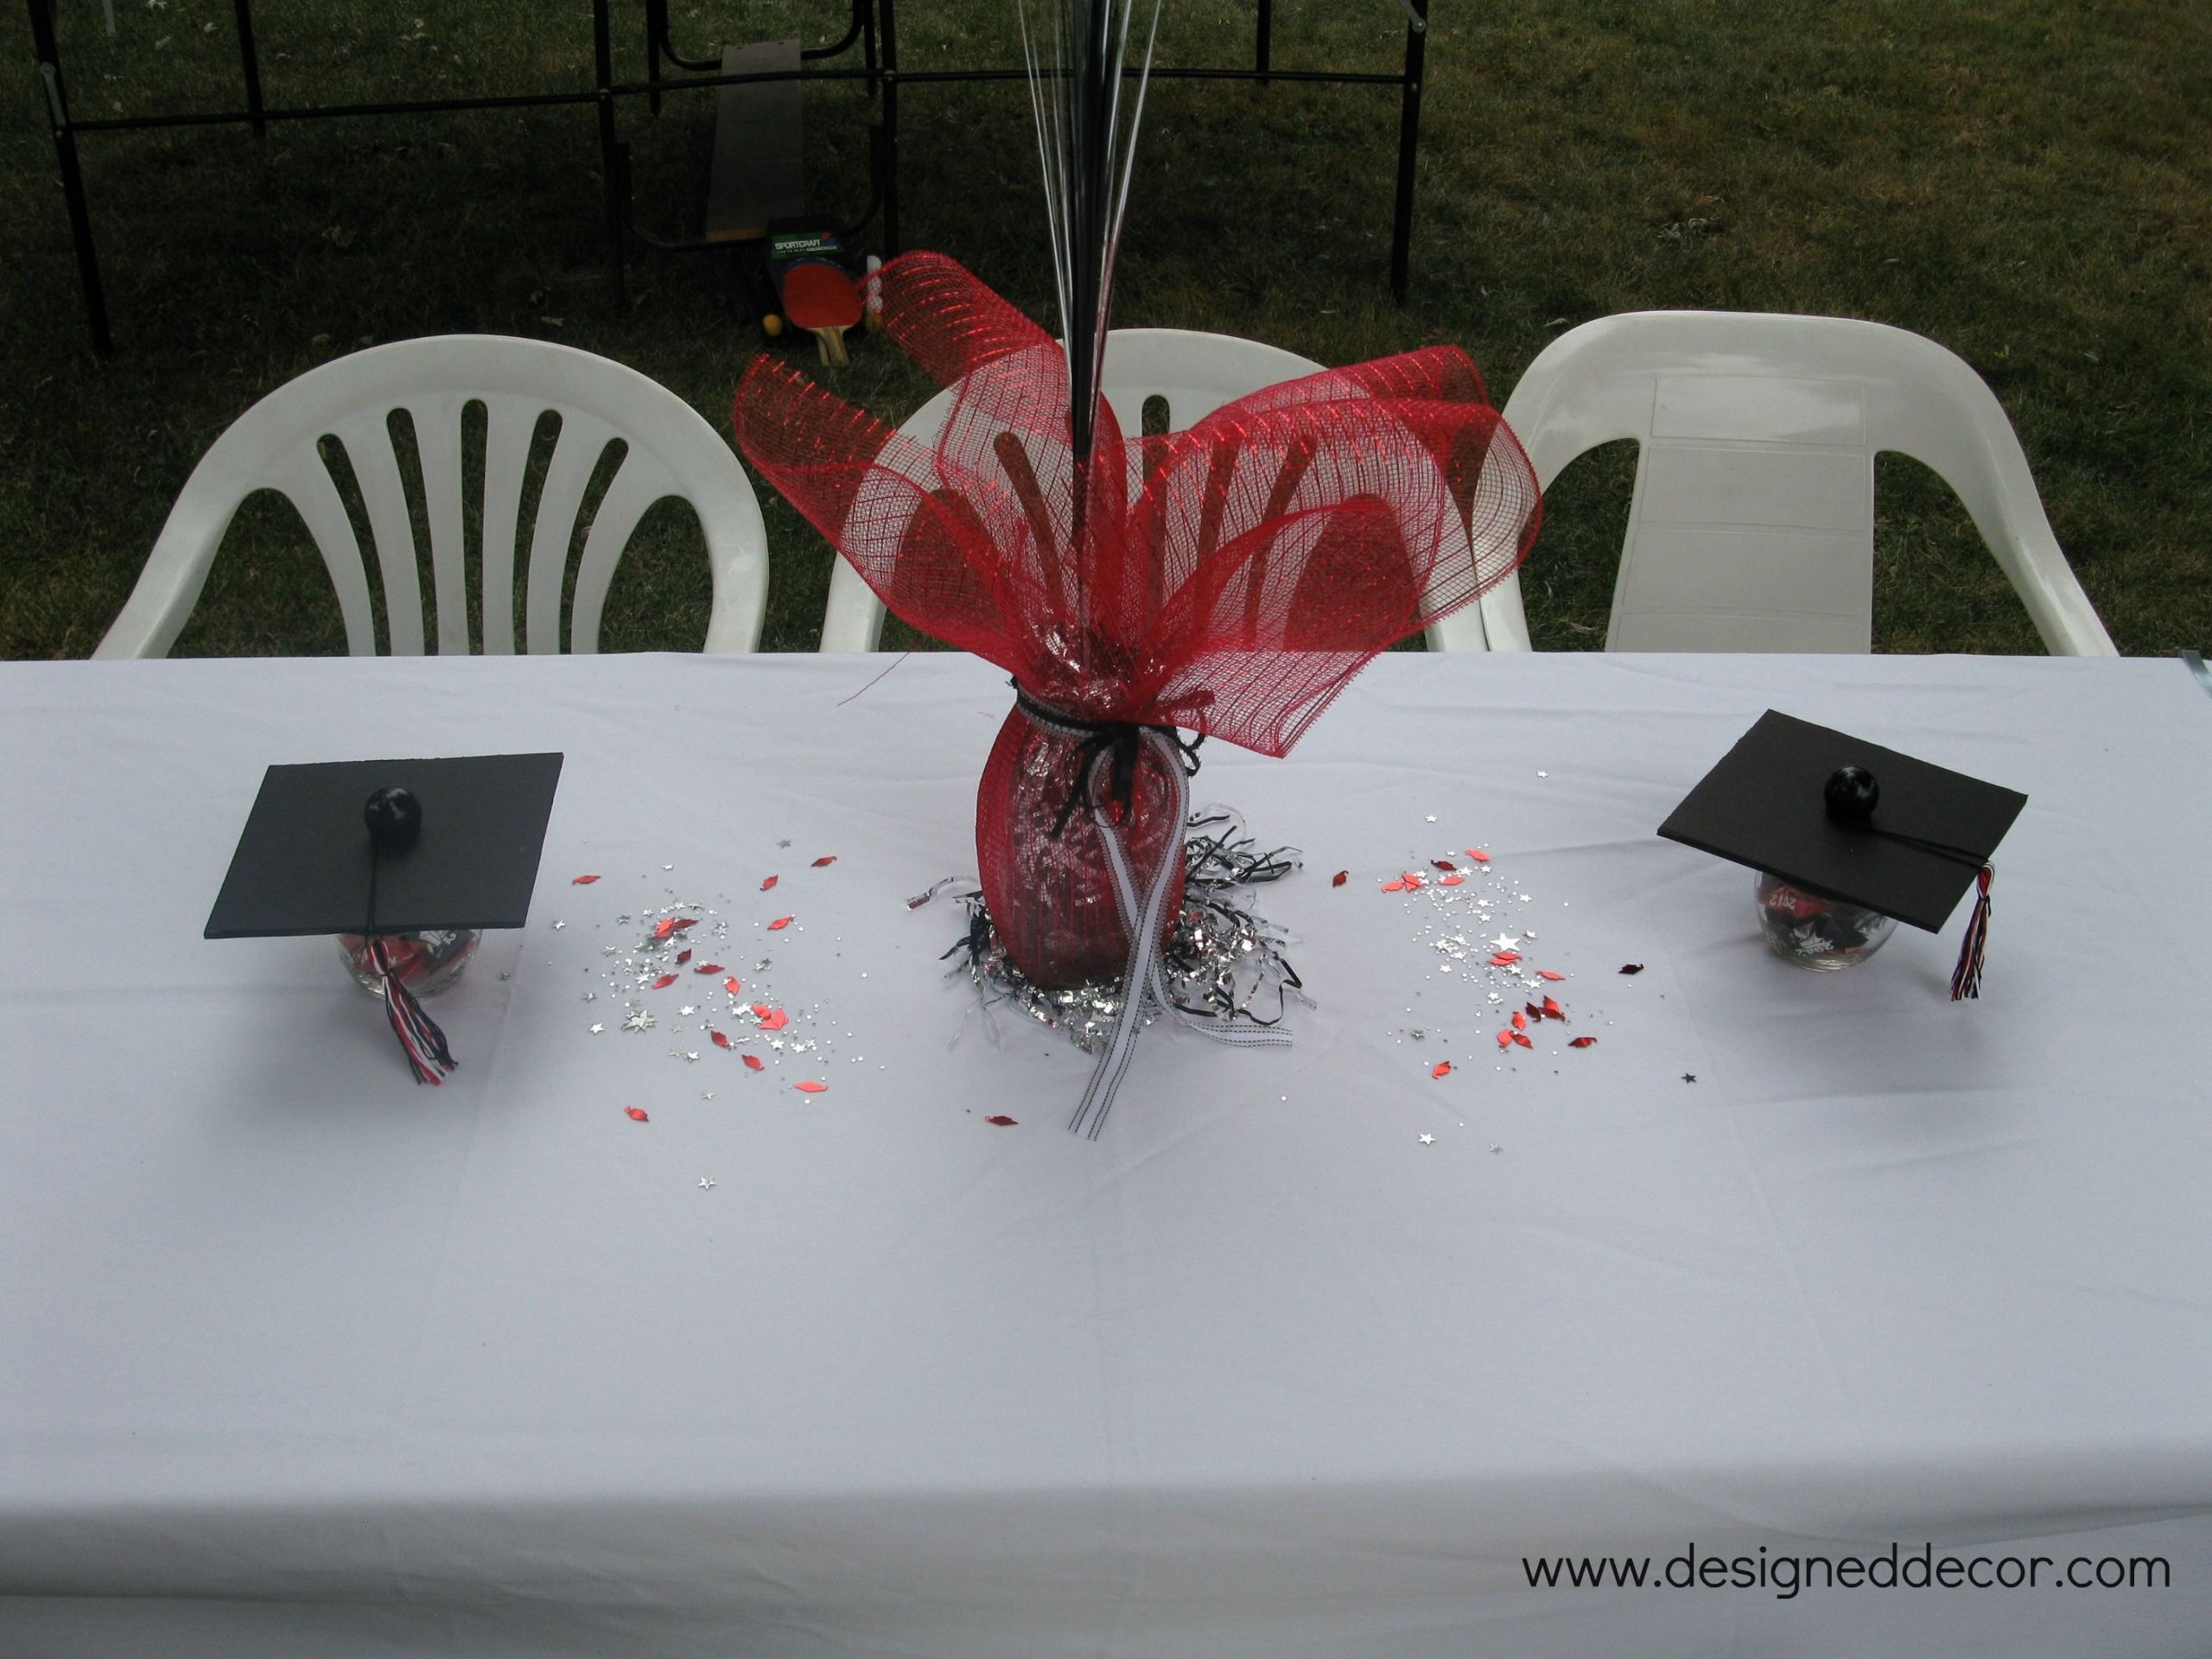 Graduation Party Table Centerpiece Ideas
 Graduation Party Putting it all to her